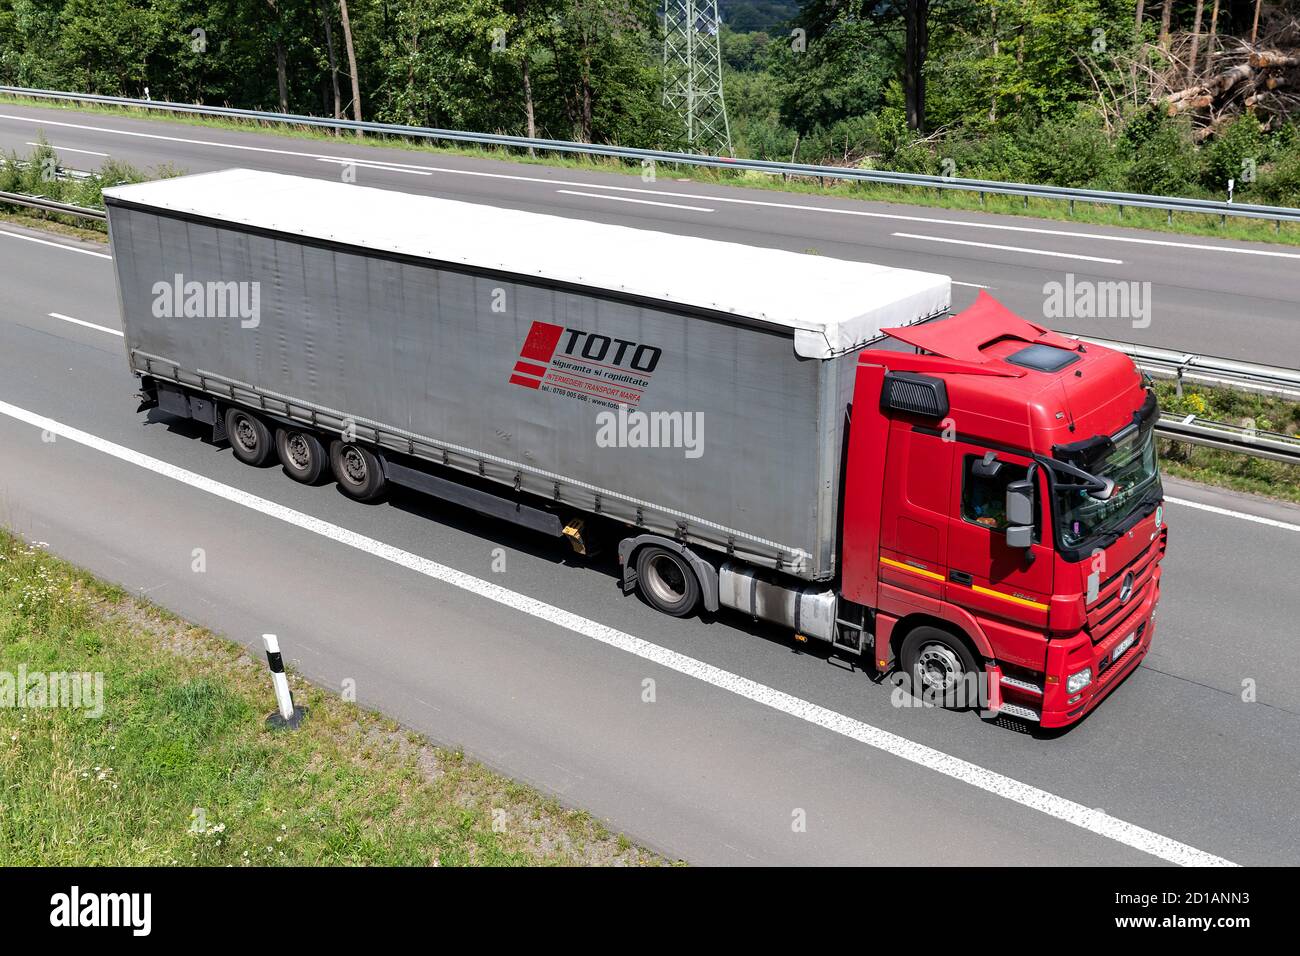 TOTO Mercedes-Benz Actros truck with curtainside trailer on motorway. Stock Photo